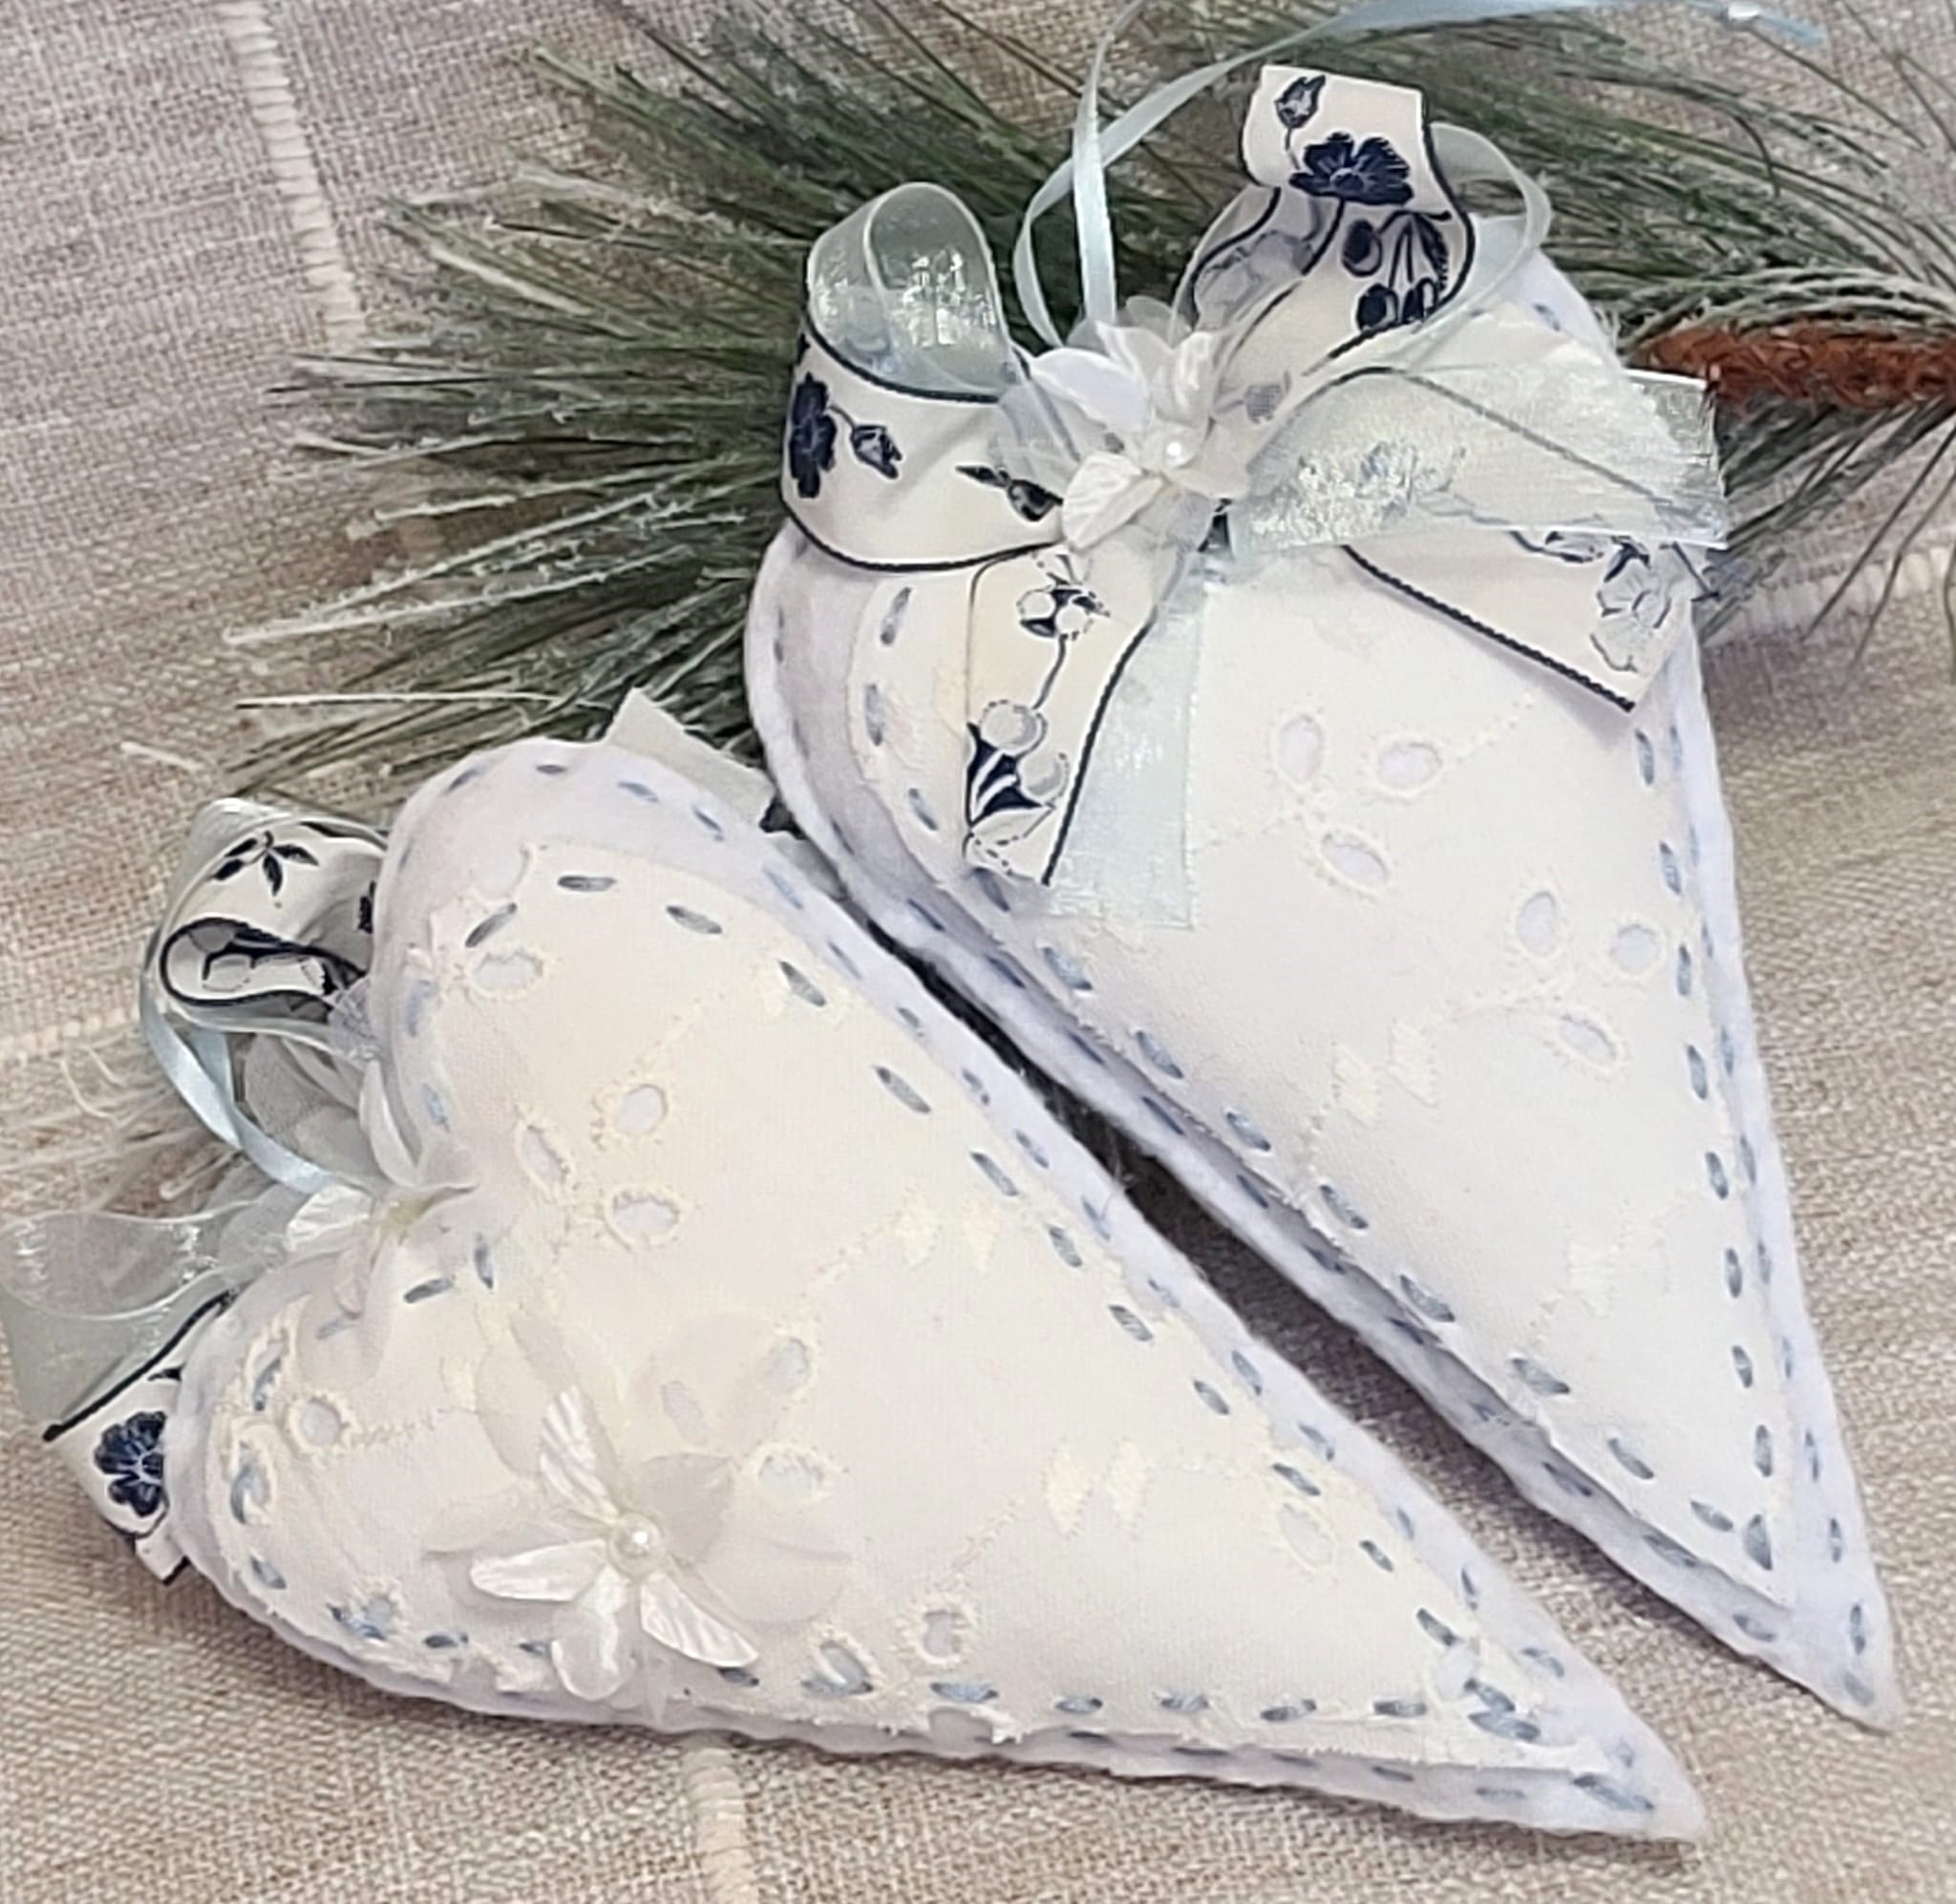 Pale Blue felt and eyelet lace heart ornaments set of 2